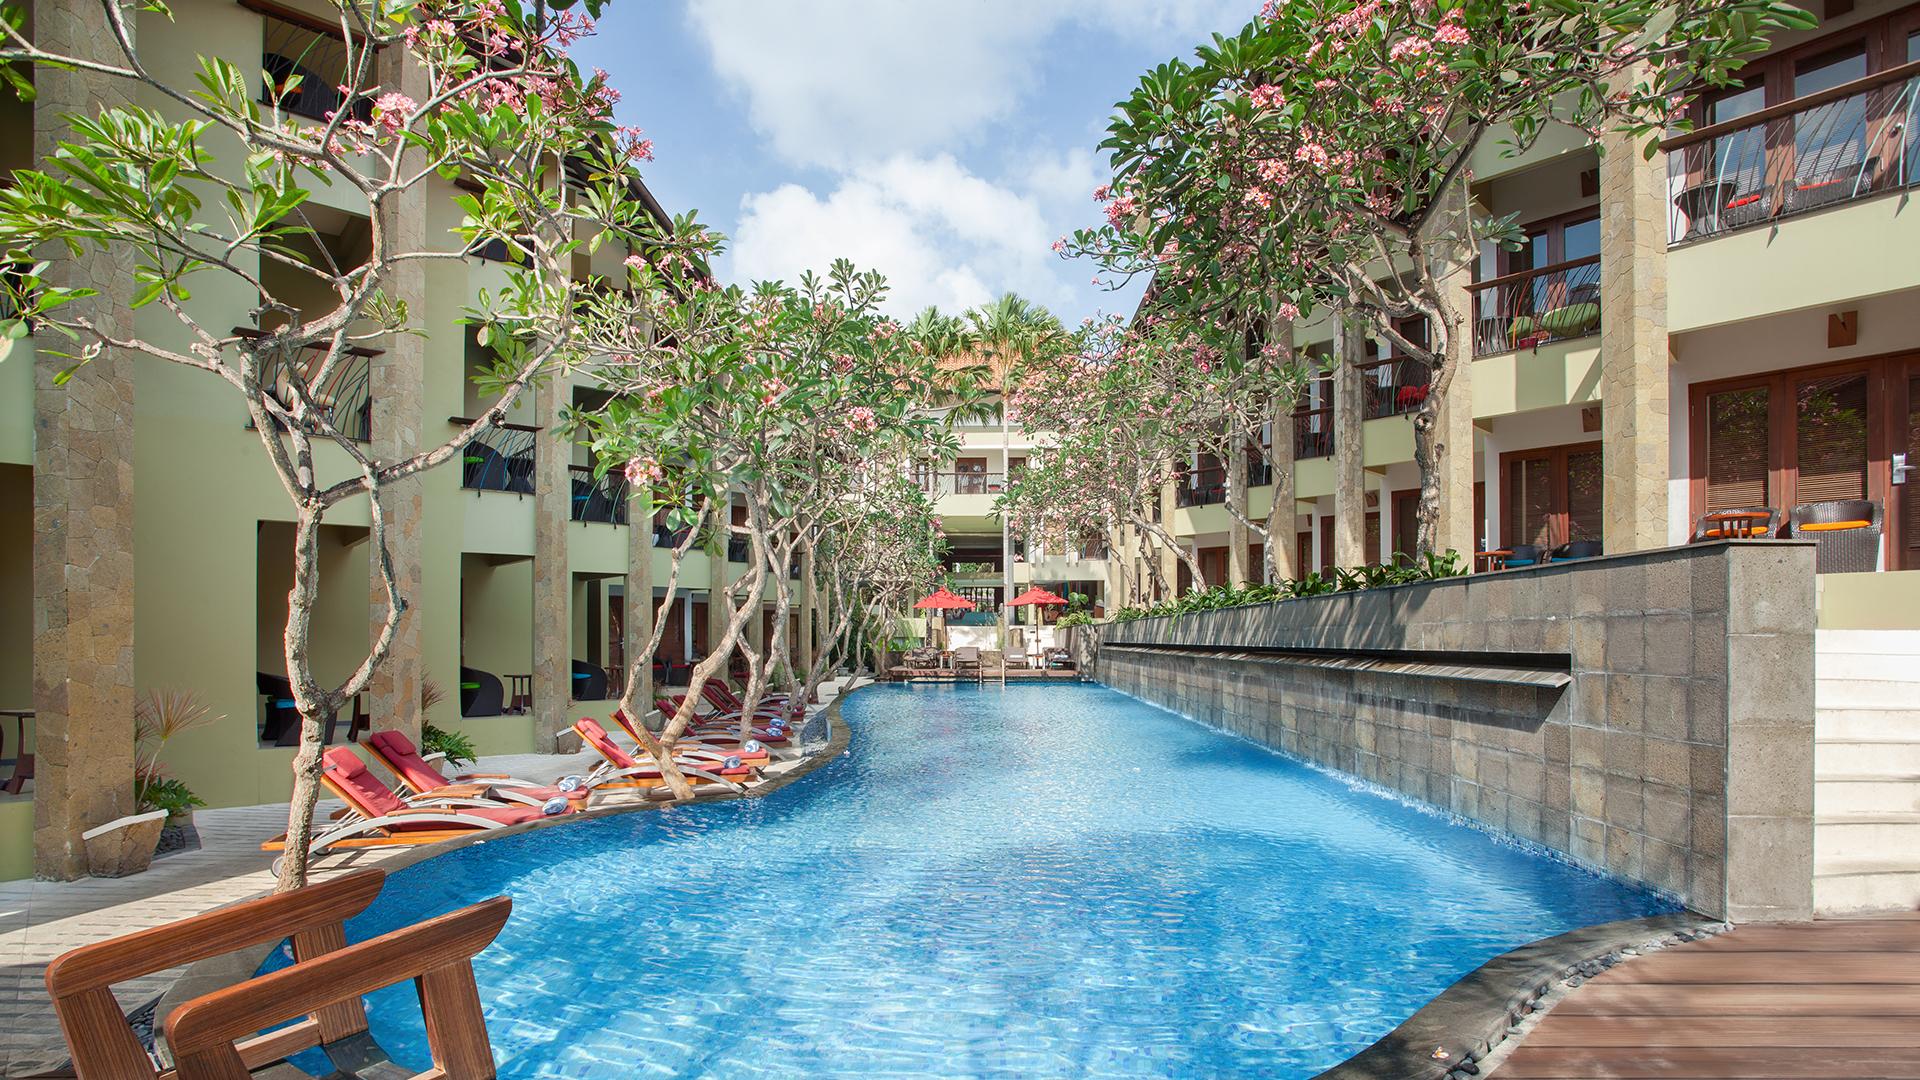 Bali, Indonesia Holiday Packages 2022/2023 Hotel + Flight Deals